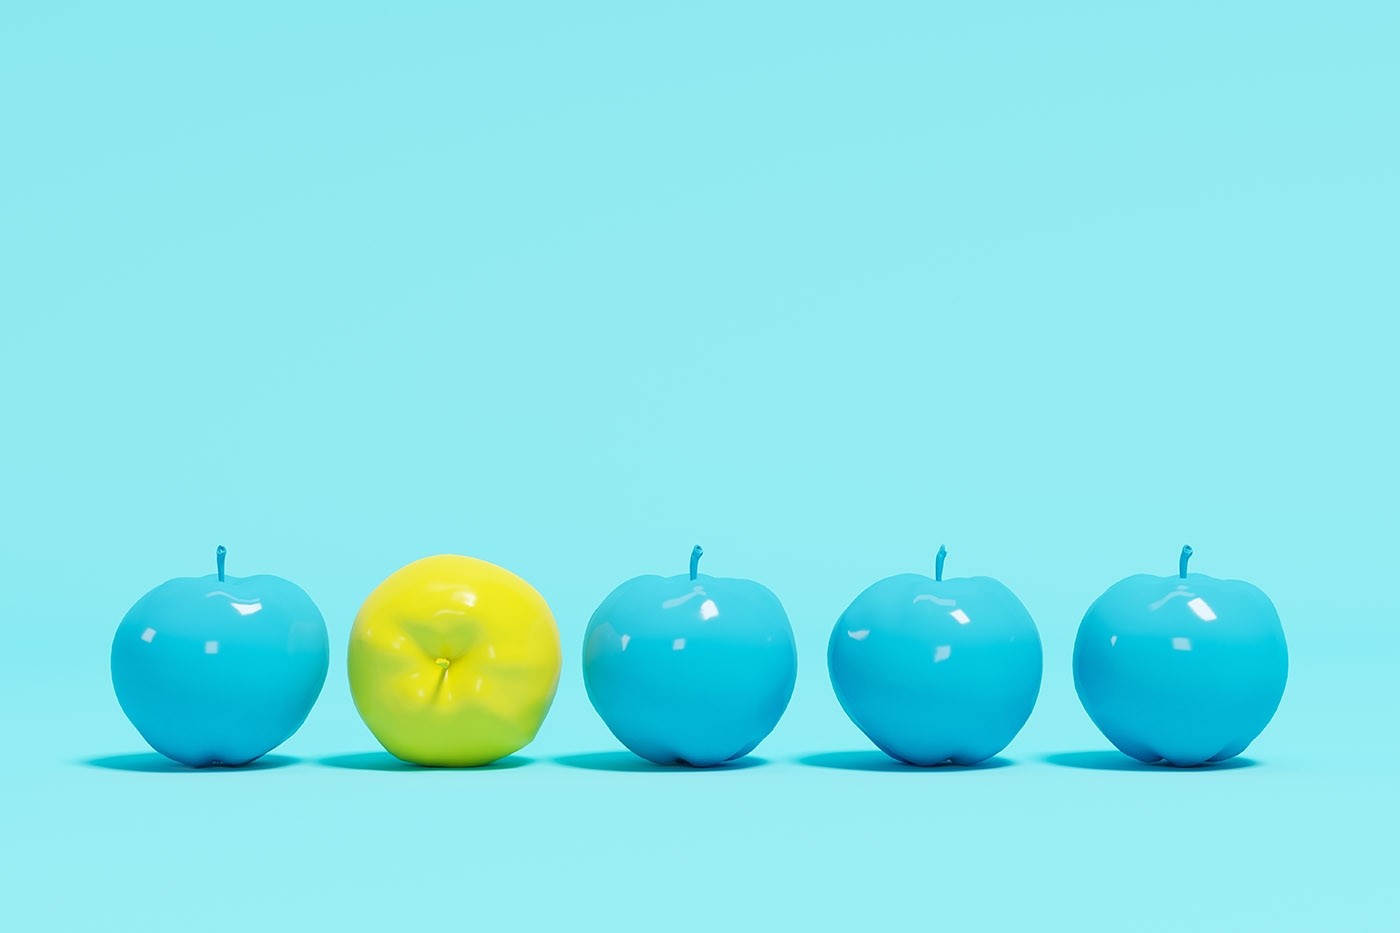 Row of 4 blue apples and 1 yellow lemon in front of a light blue background, highlighting contrast of colors